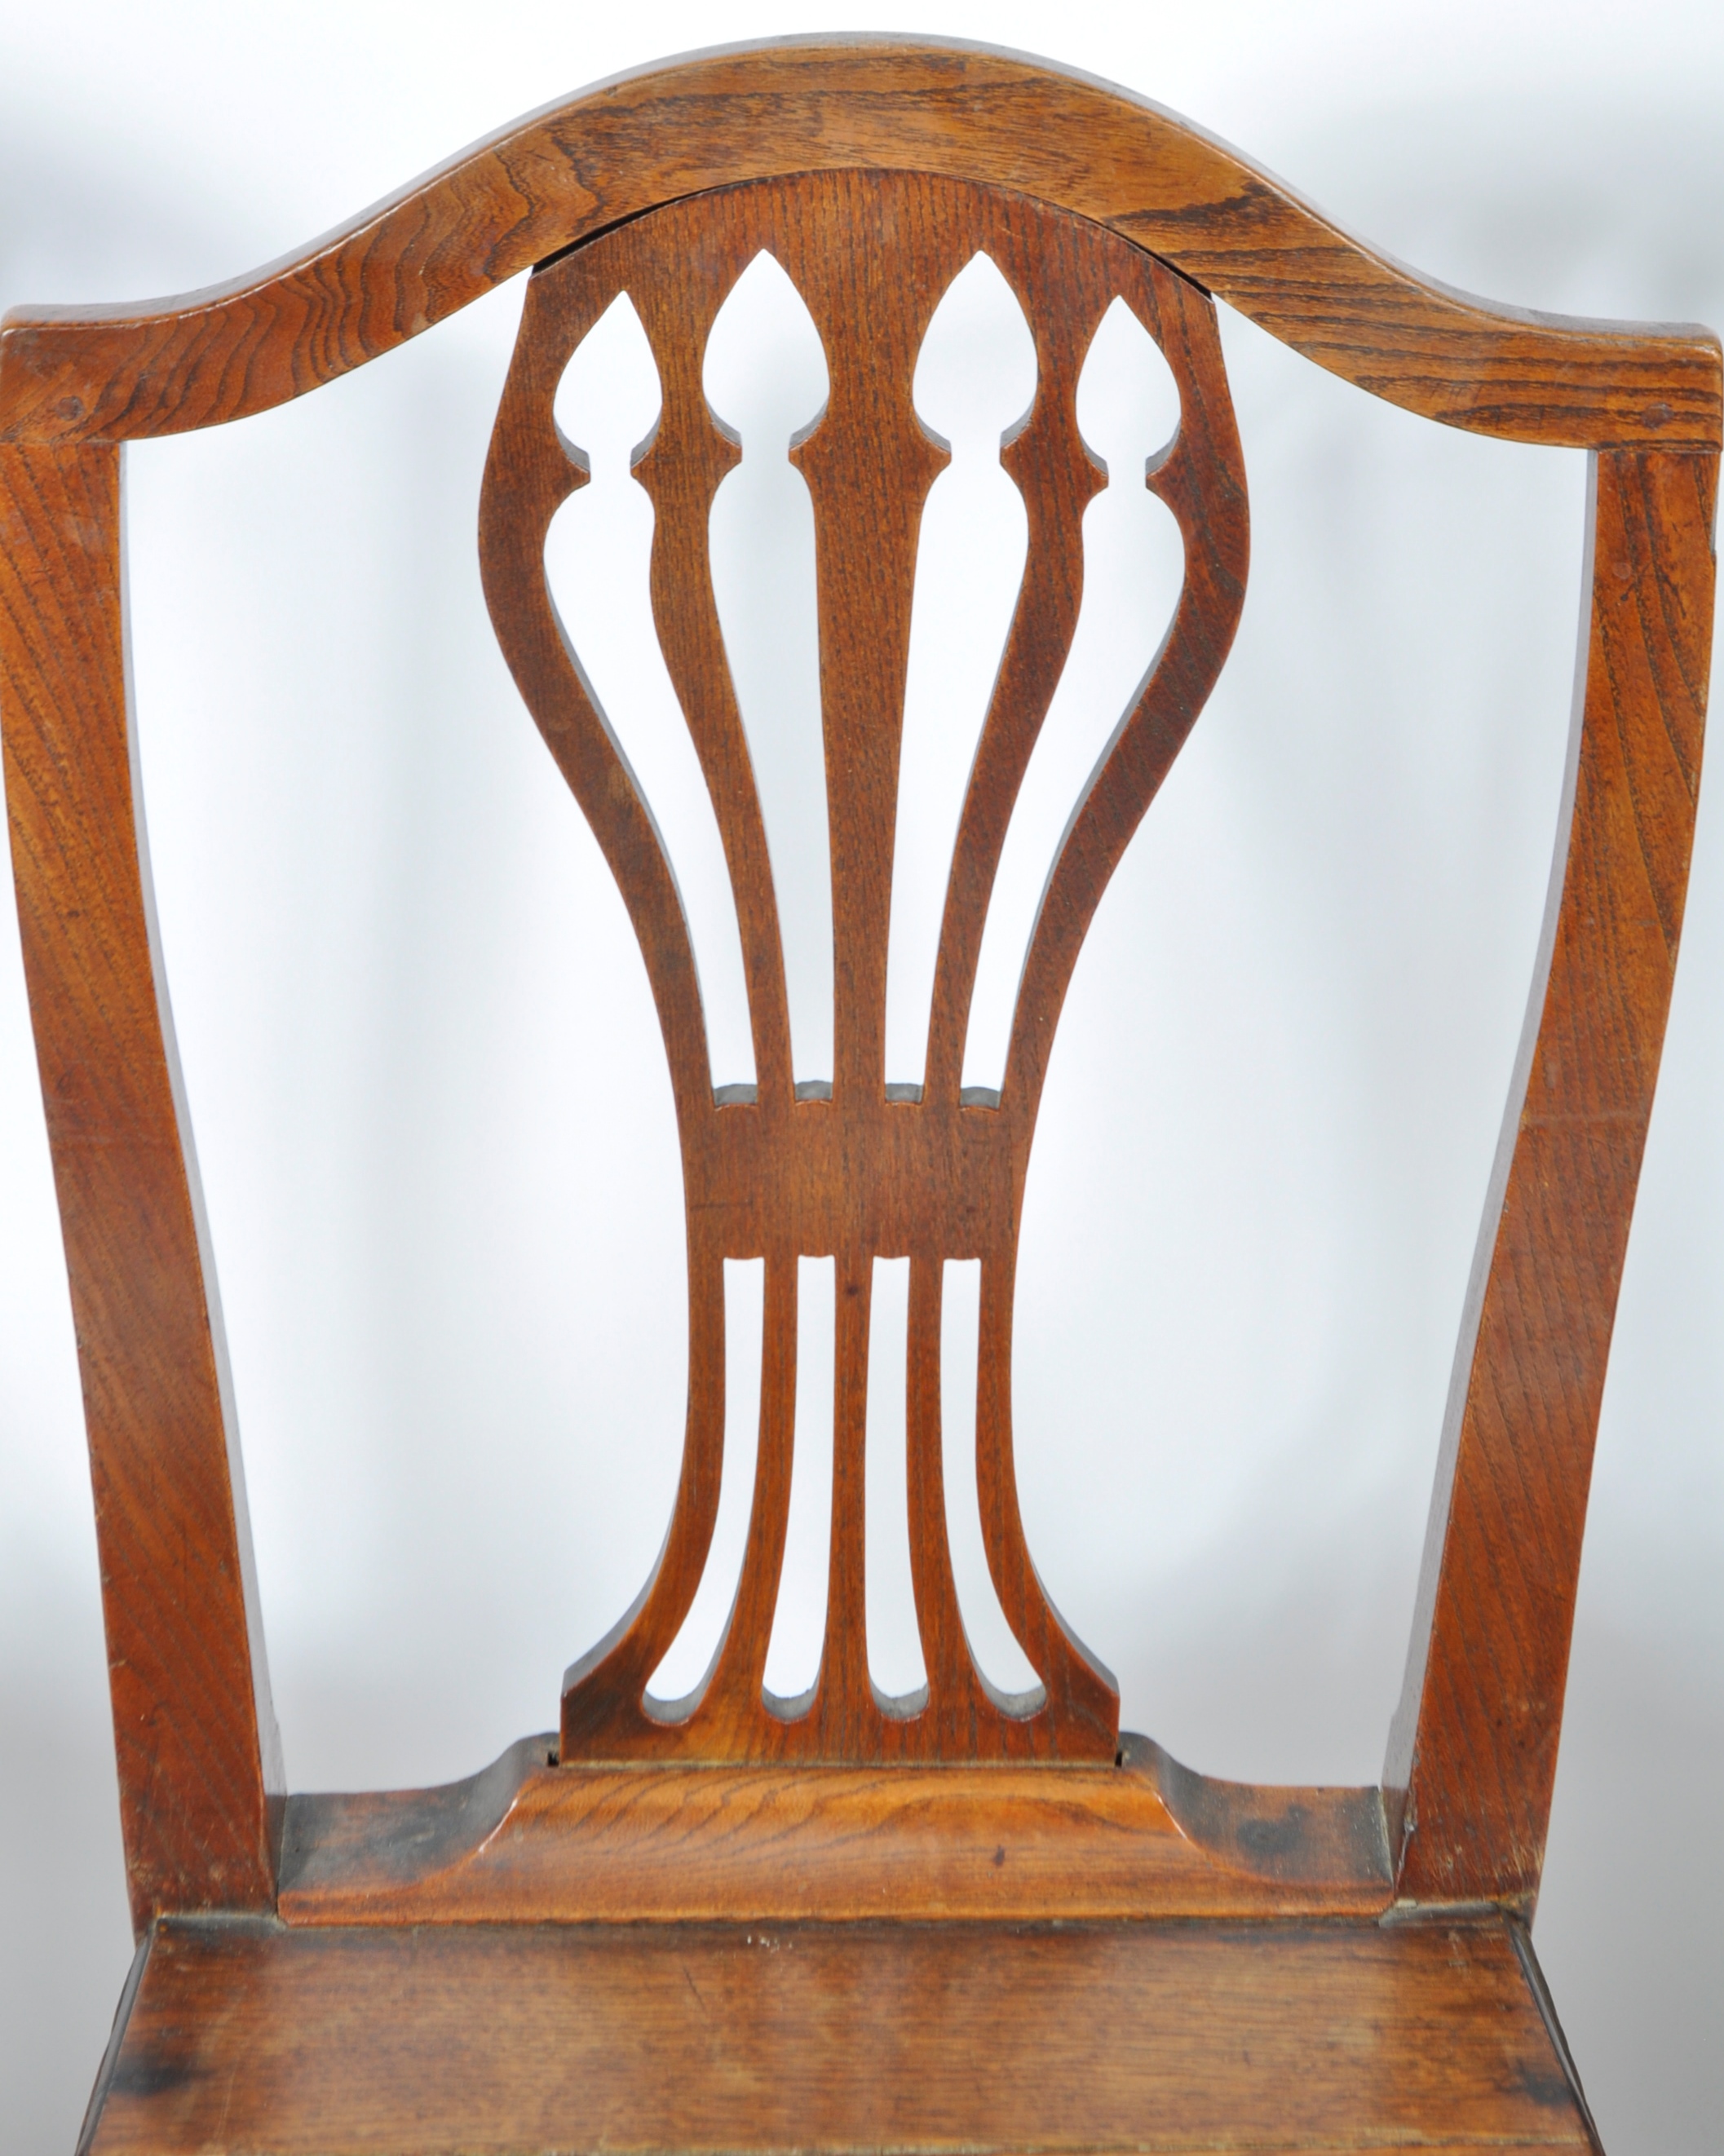 SET OF SIX 18TH CENTURY CHIPPENDALE STYLE OAK & ELM DINING CHAIRS - Image 4 of 11